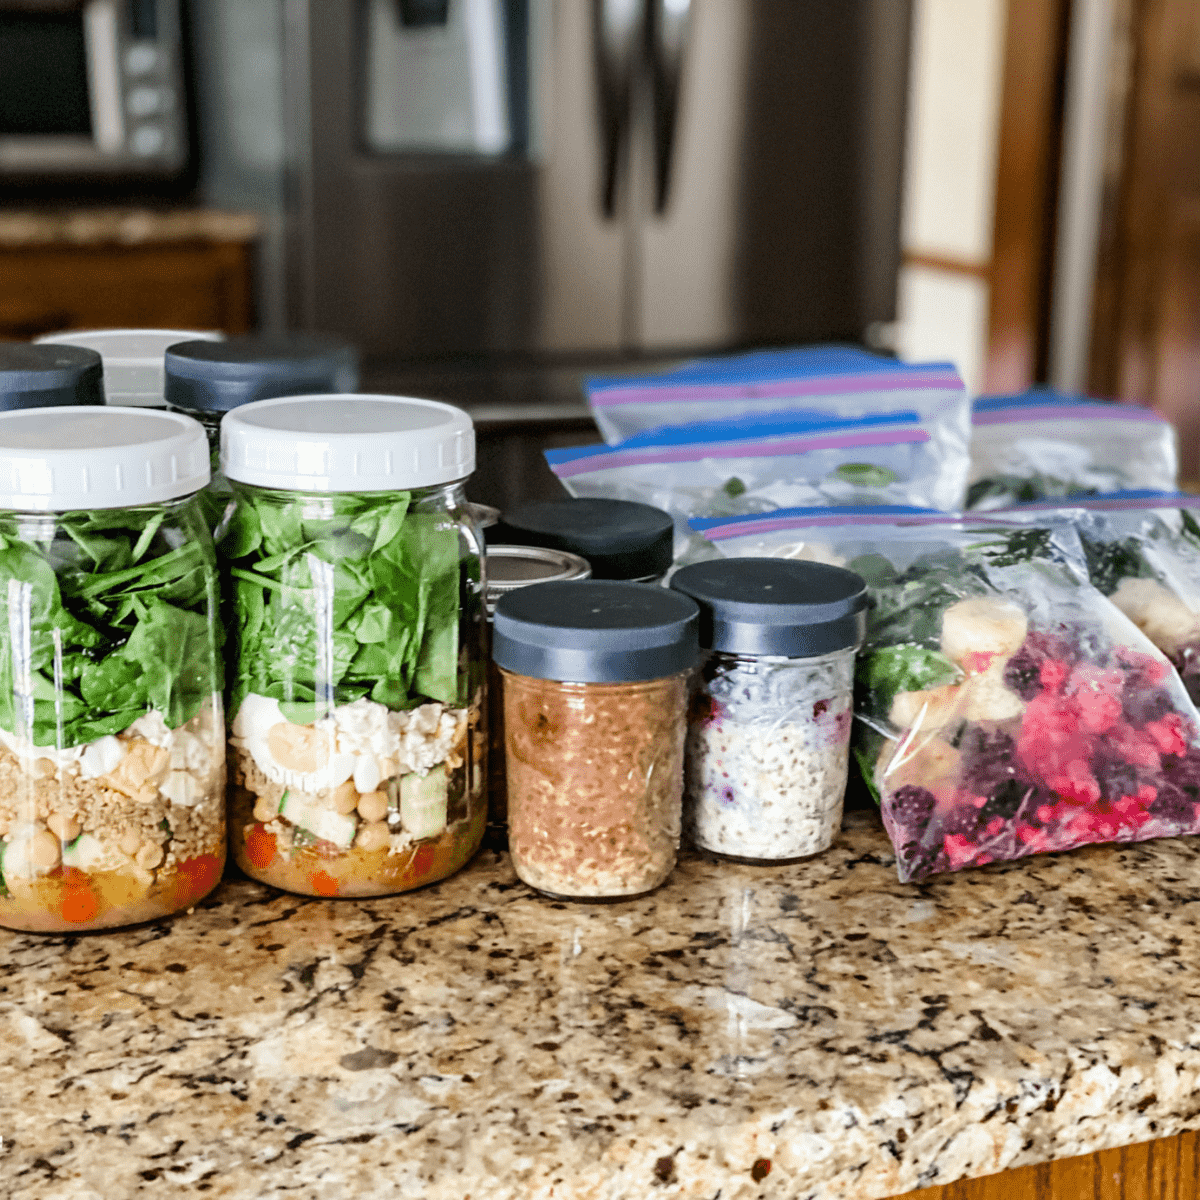 How to Prepare Meal Prep Bowls - Organize Yourself Skinny